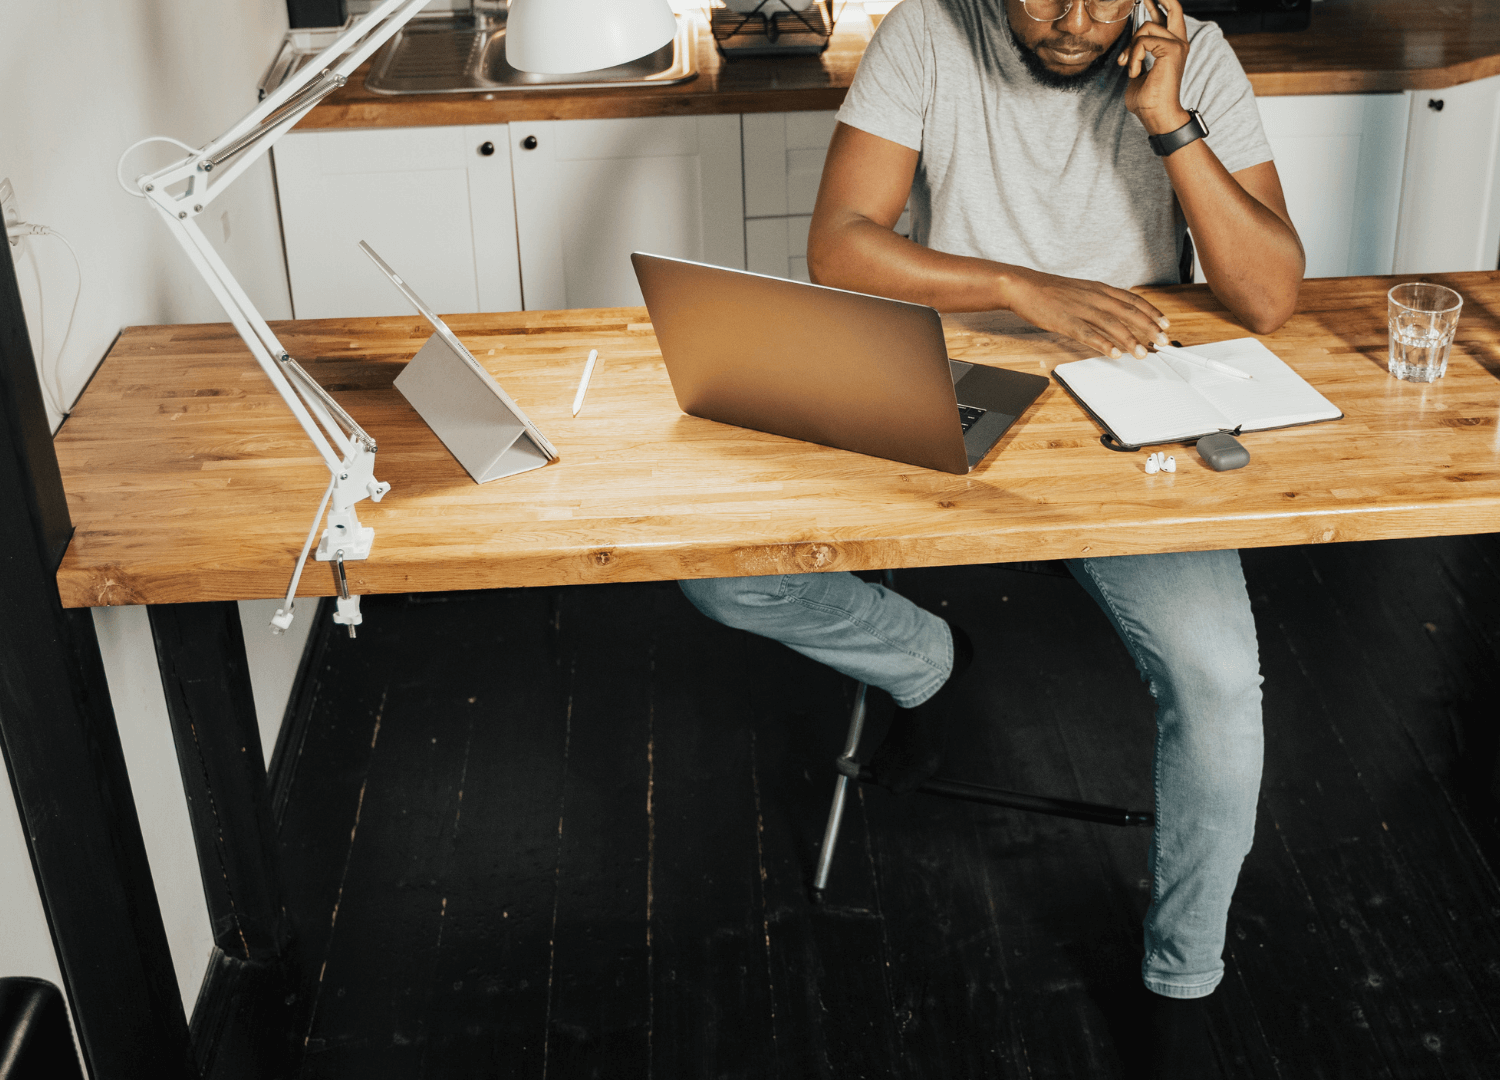 A man focuses on a laptop for Brave Minds. We offer therapy for perfectionism in Scotch Plains, NJ, anxiety counseling, and other services. Contact a perfectionism therapist today for more info!